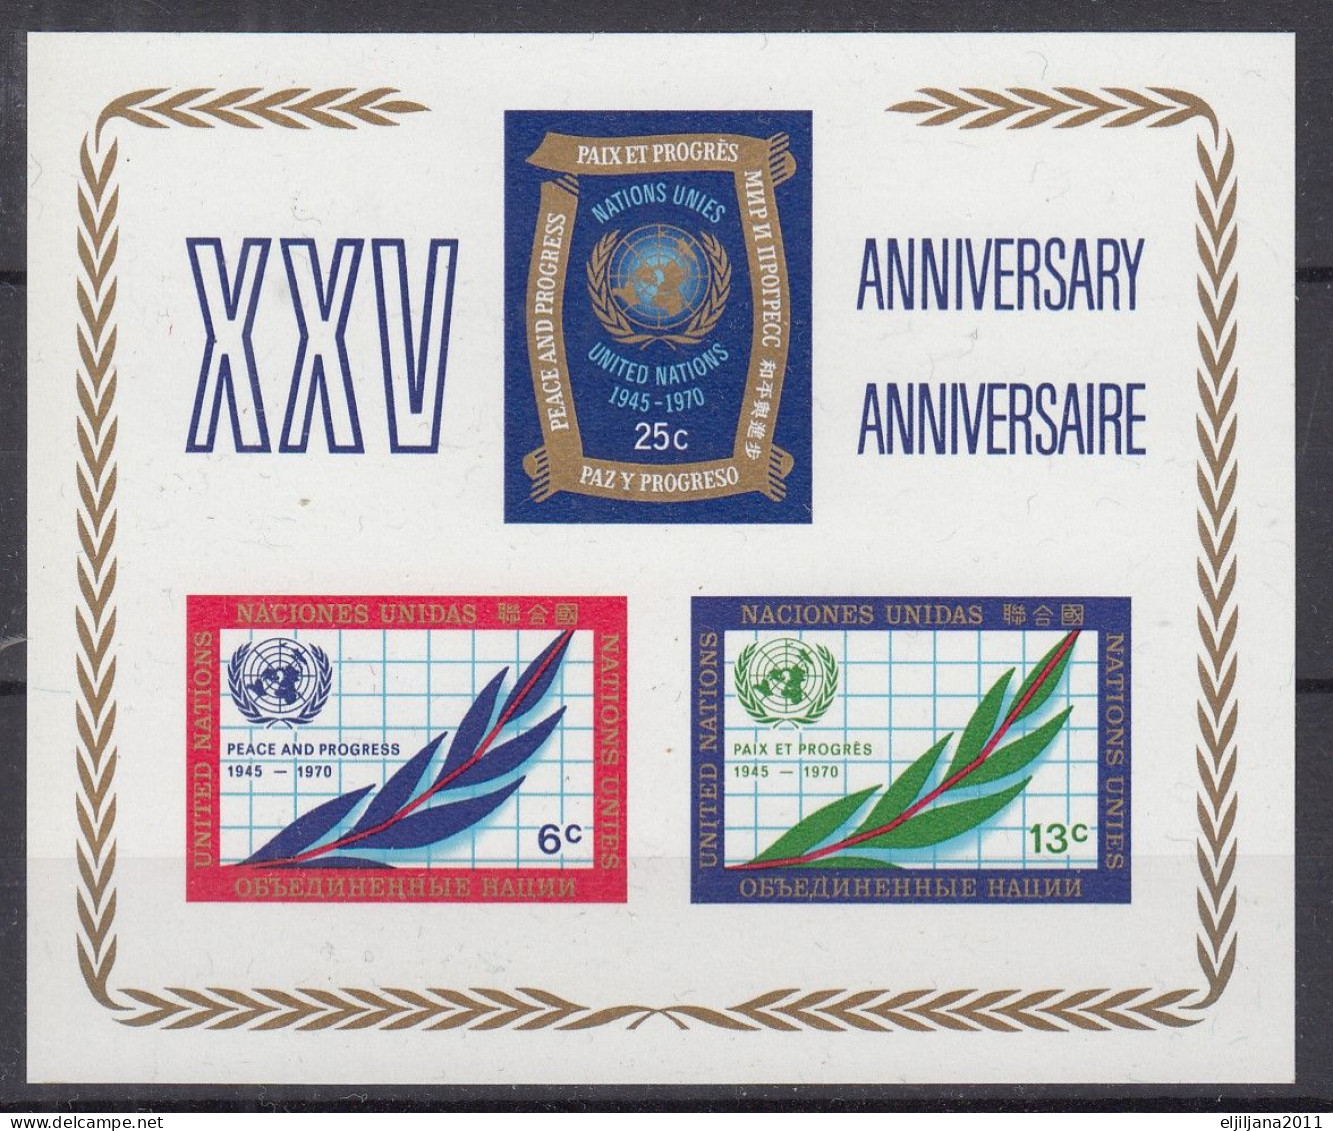 Action !! SALE !! 50 % OFF !! ⁕ UN 1970 New York ⁕ United Nations 25th Anniv. ⁕ MNH & FDC Used Block 5 - Ungebraucht